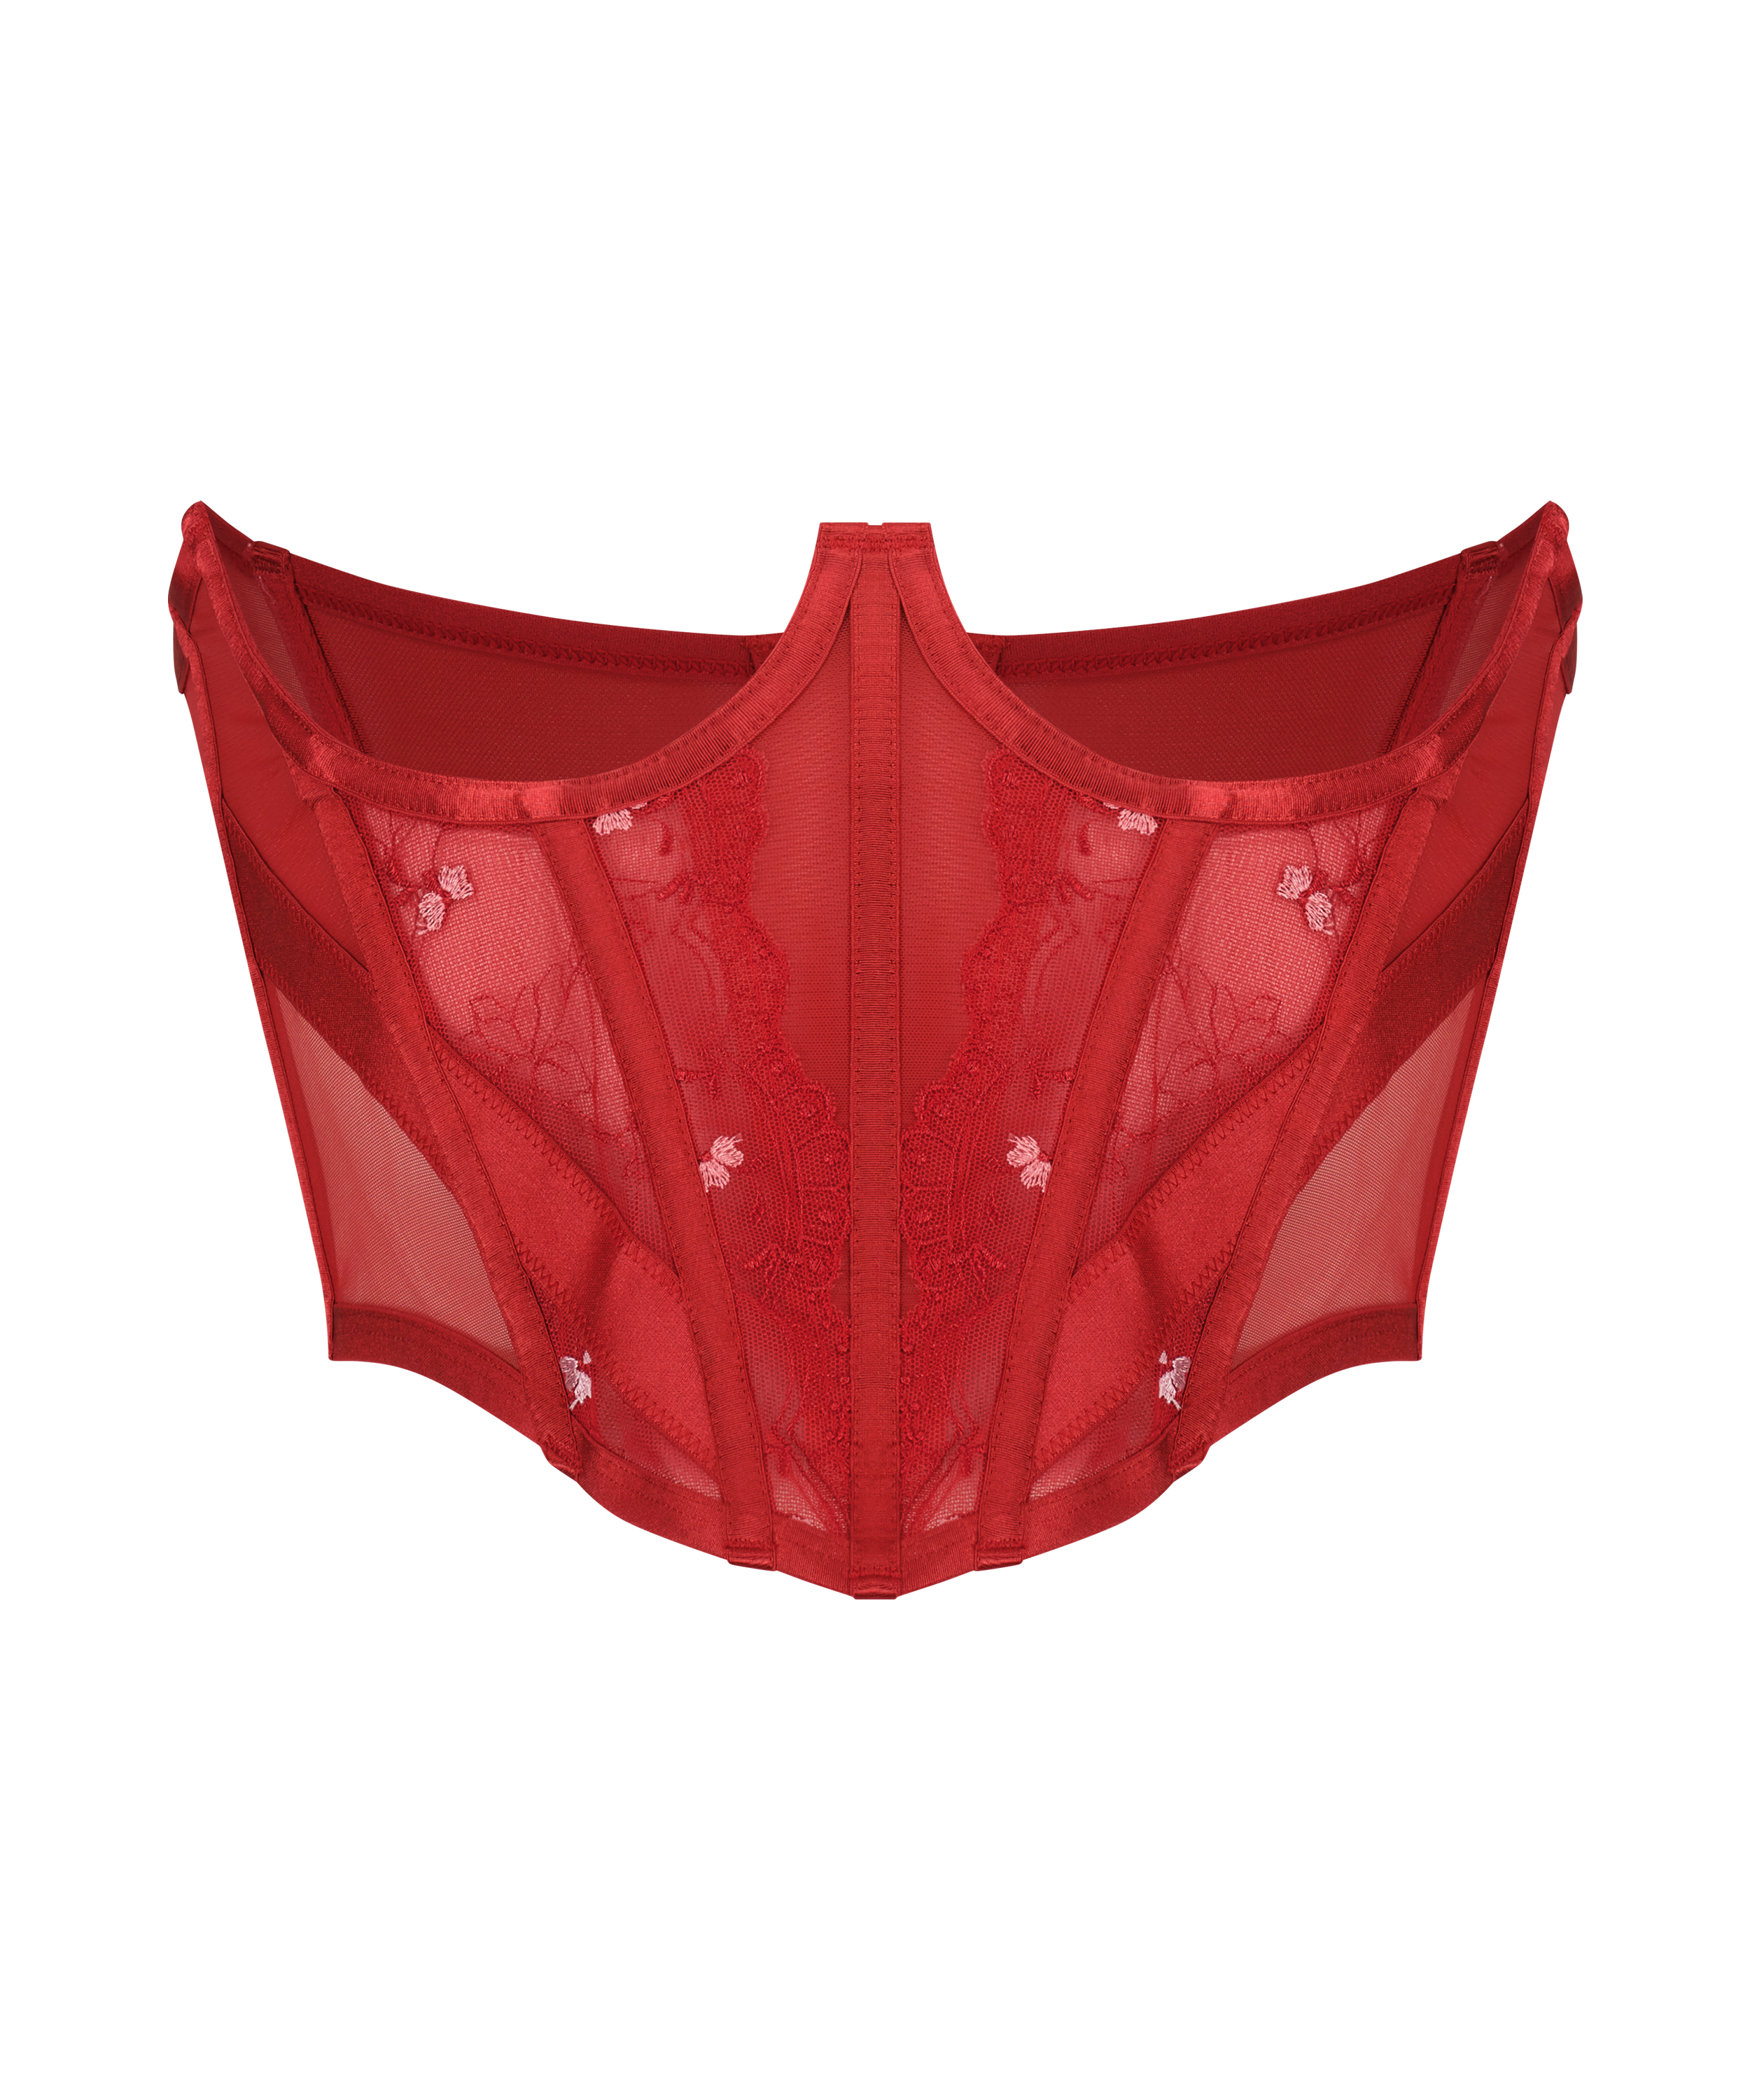 Bustier Violet ohne Cup, Rot, main